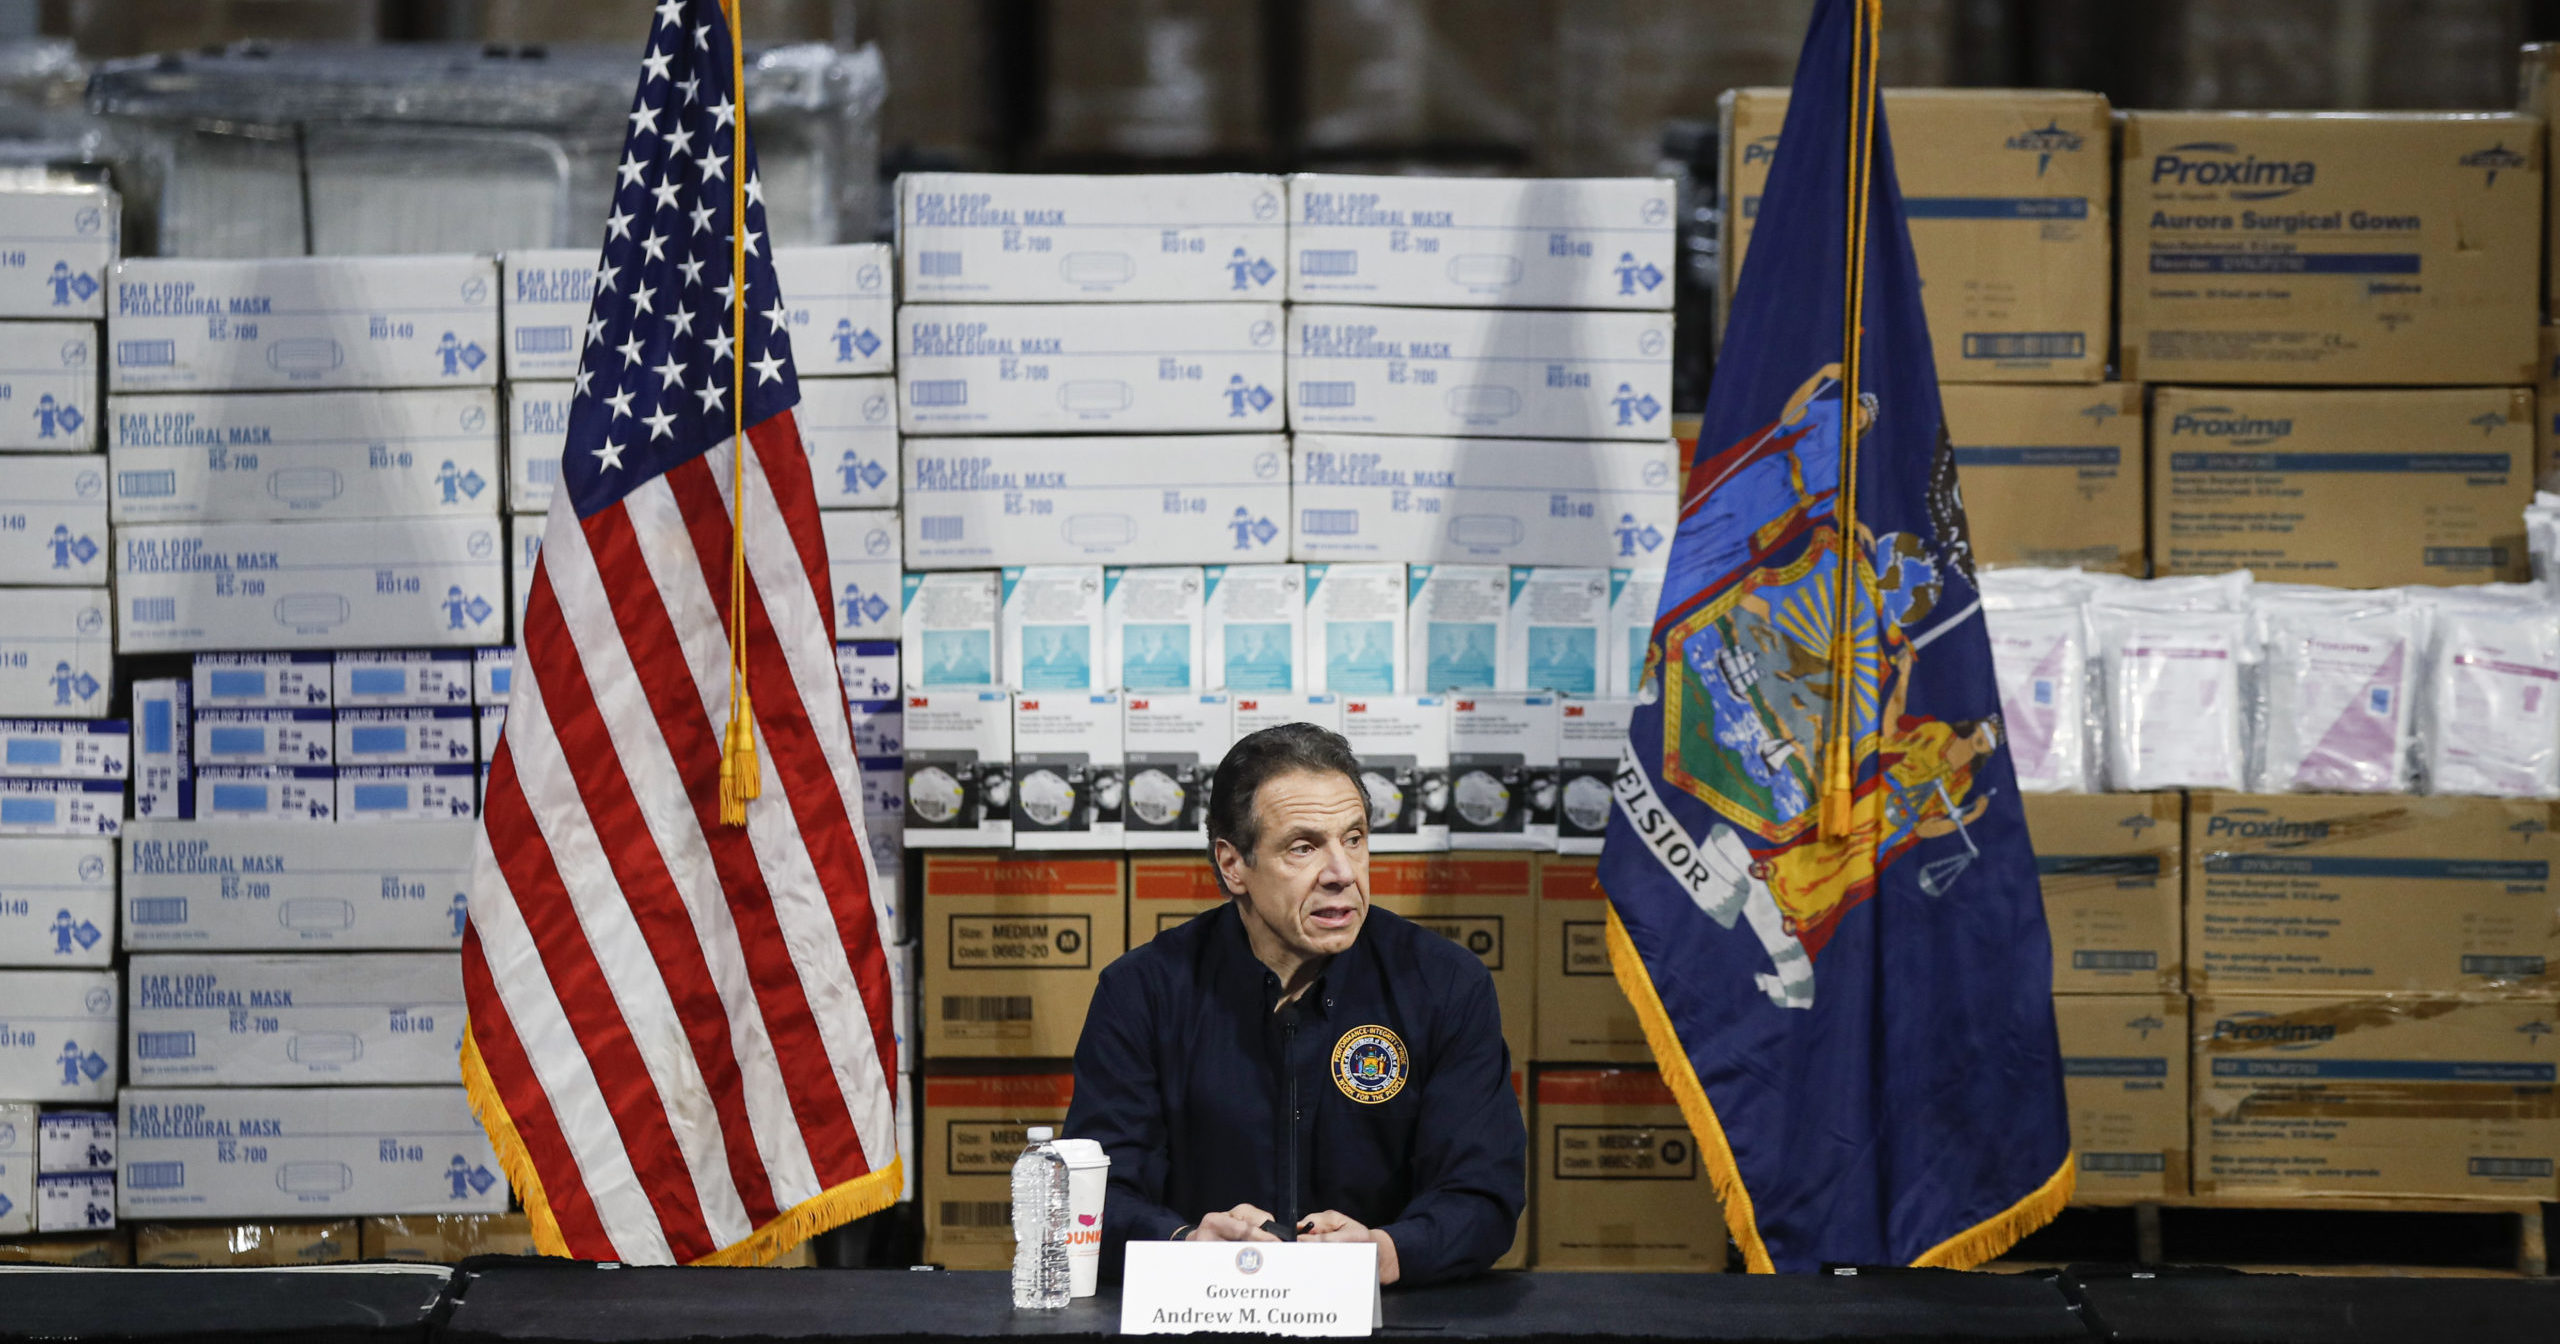 Gov. Andrew Cuomo speaks during a news conference at the Jacob Javits Center in New York on March 24, 2020.